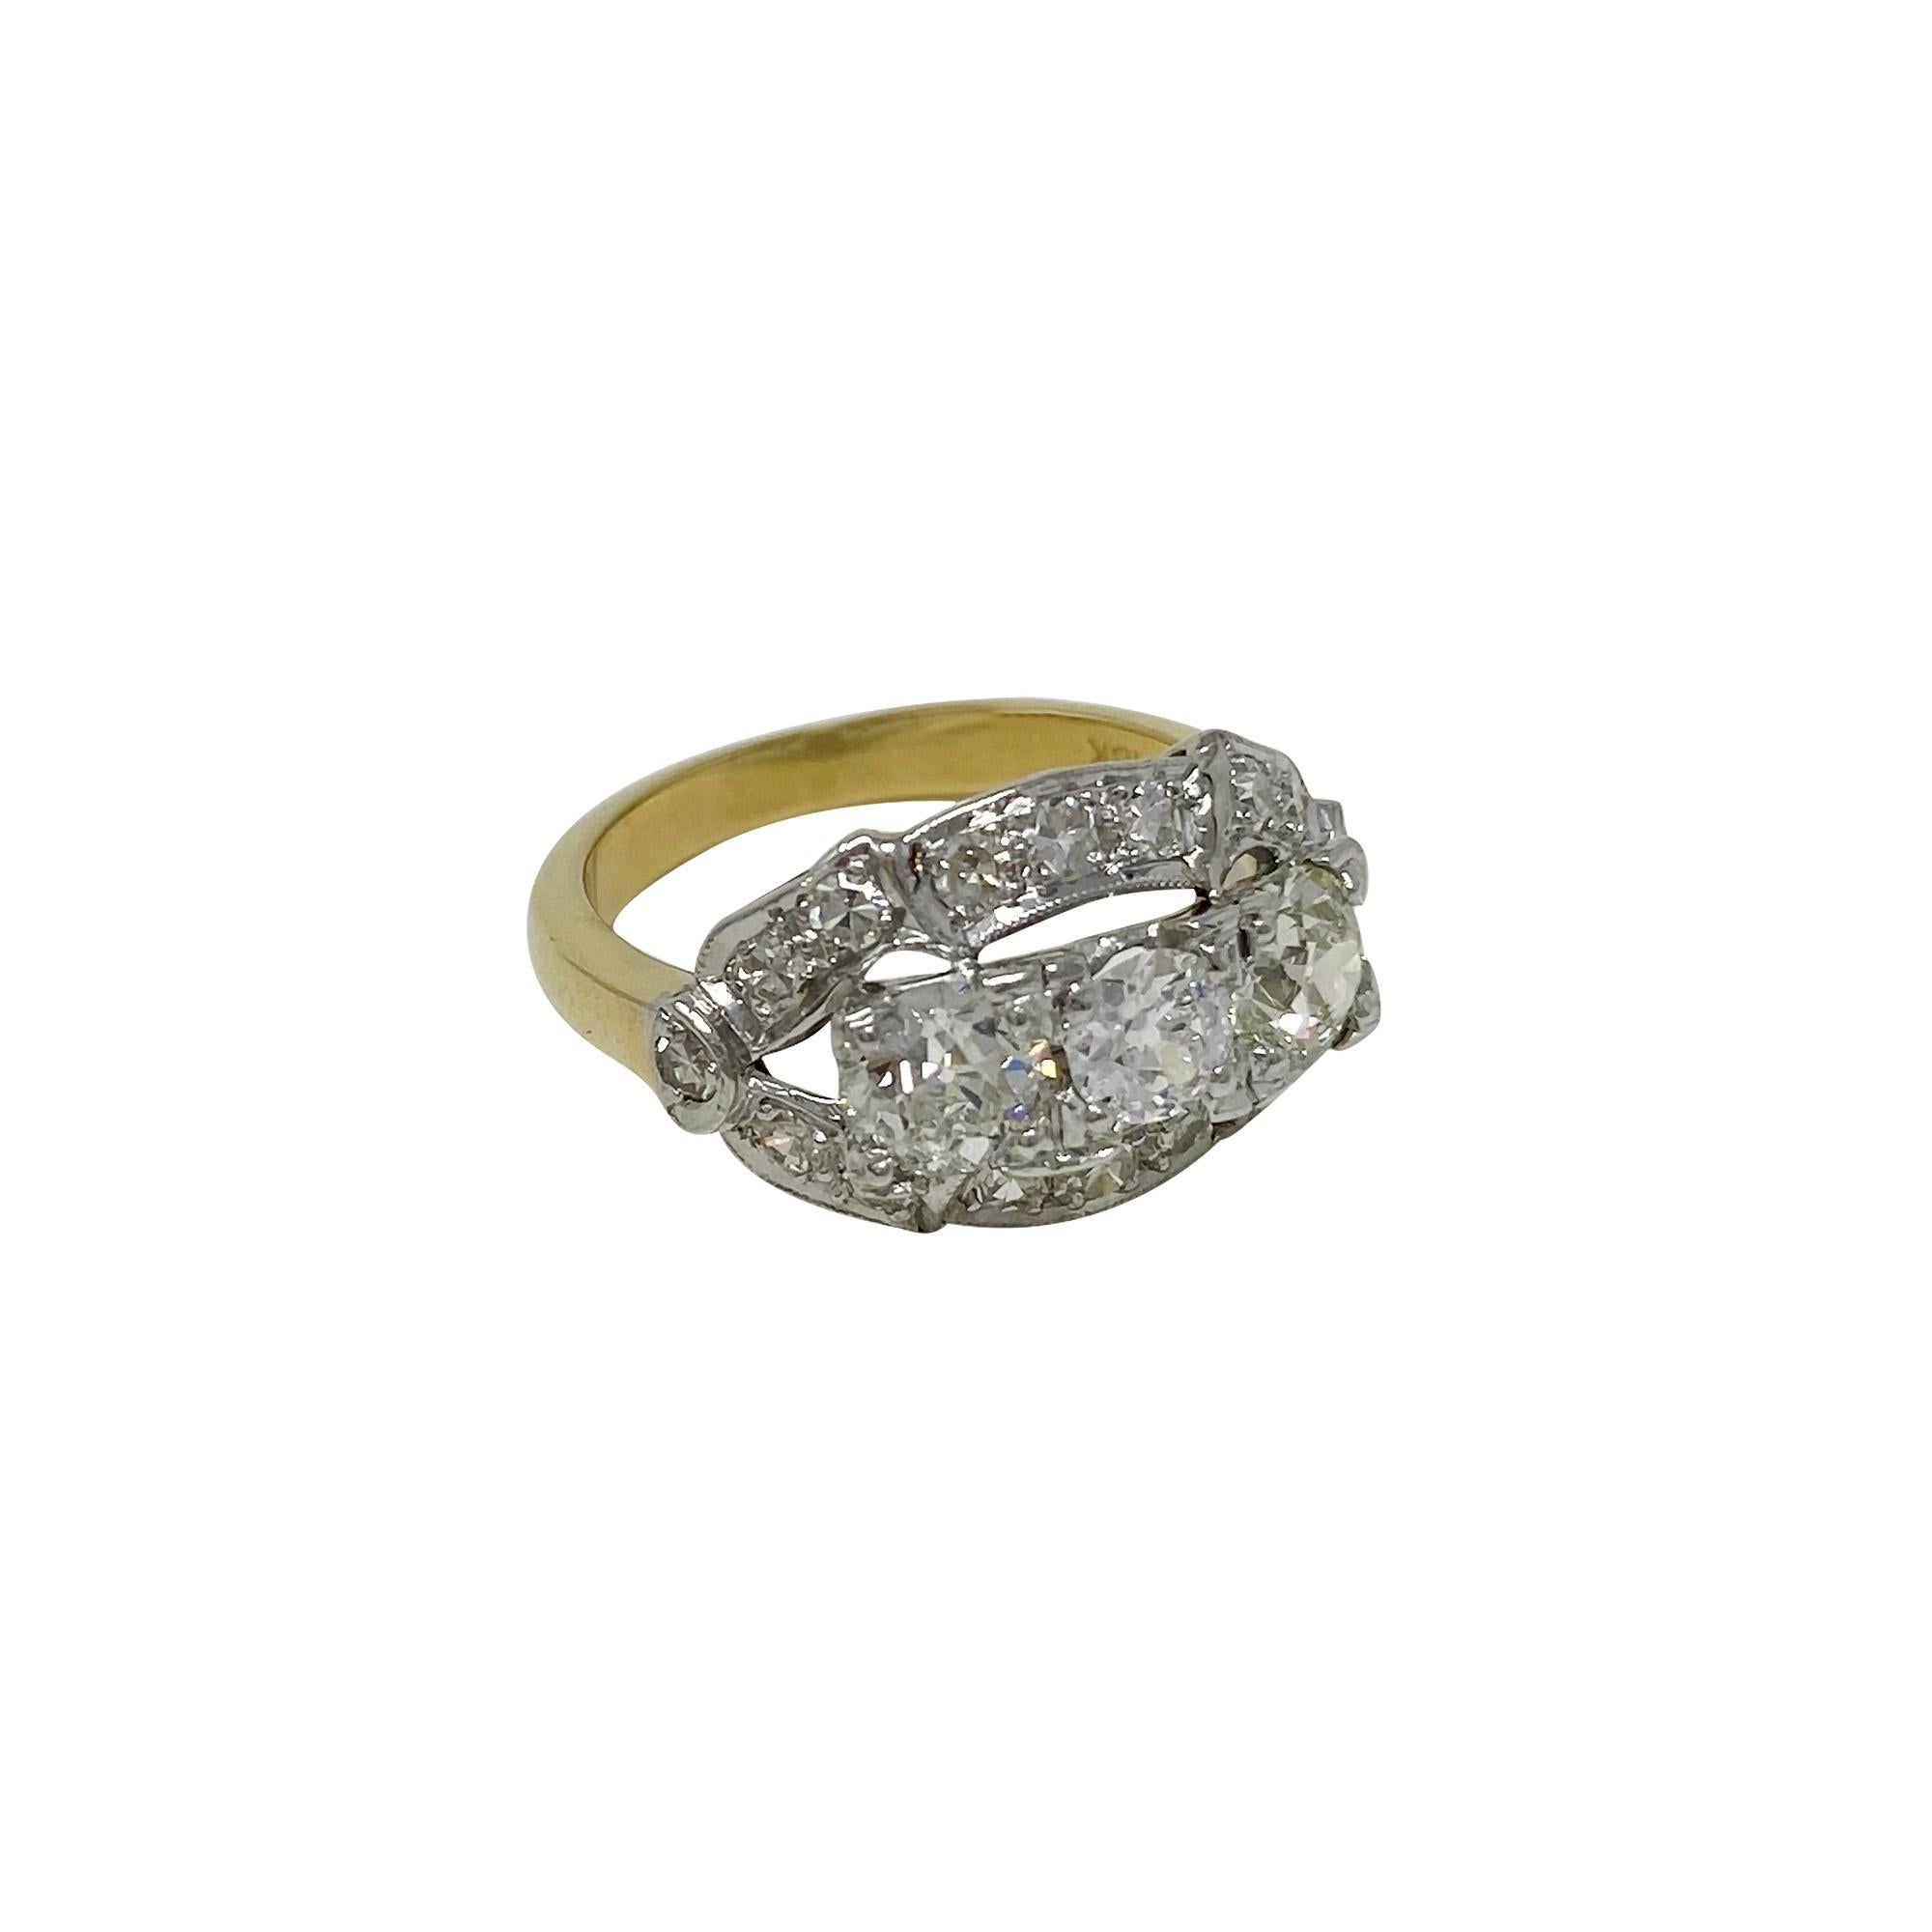 The sparkle on this lovely ring is stunning!  With 1.45 carats of diamonds, in platinum with a yellow gold shank, this beauty supports old European-cut and single-cut diamonds. Size 6.